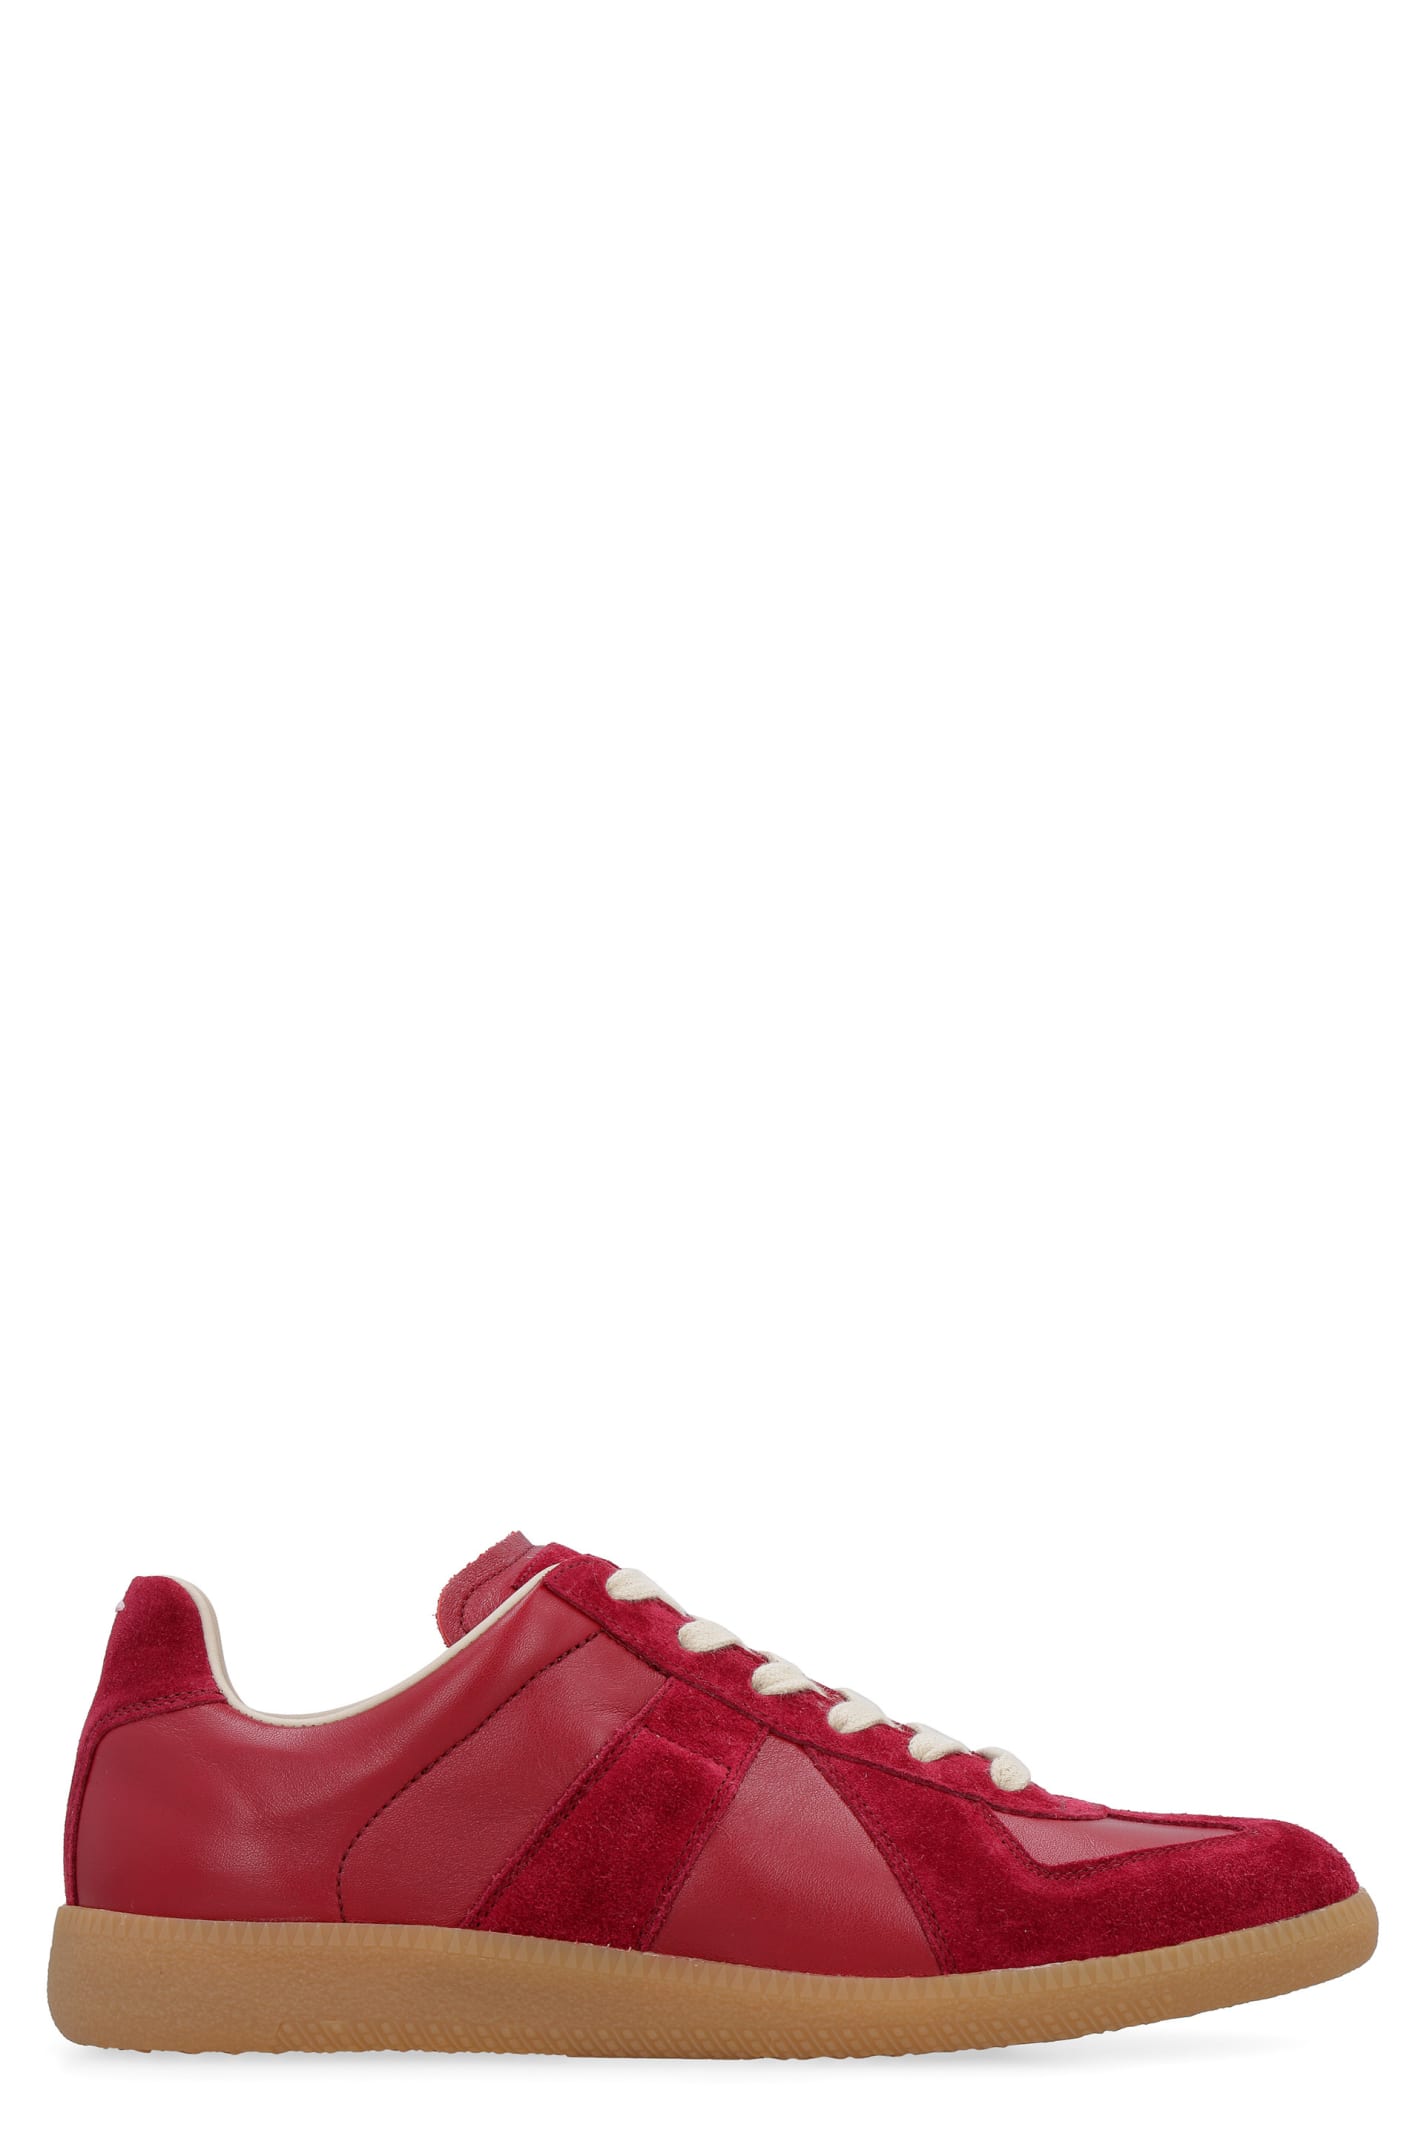 Buy Maison Margiela Replica Leather Low-top Sneakers online, shop Maison Margiela shoes with free shipping